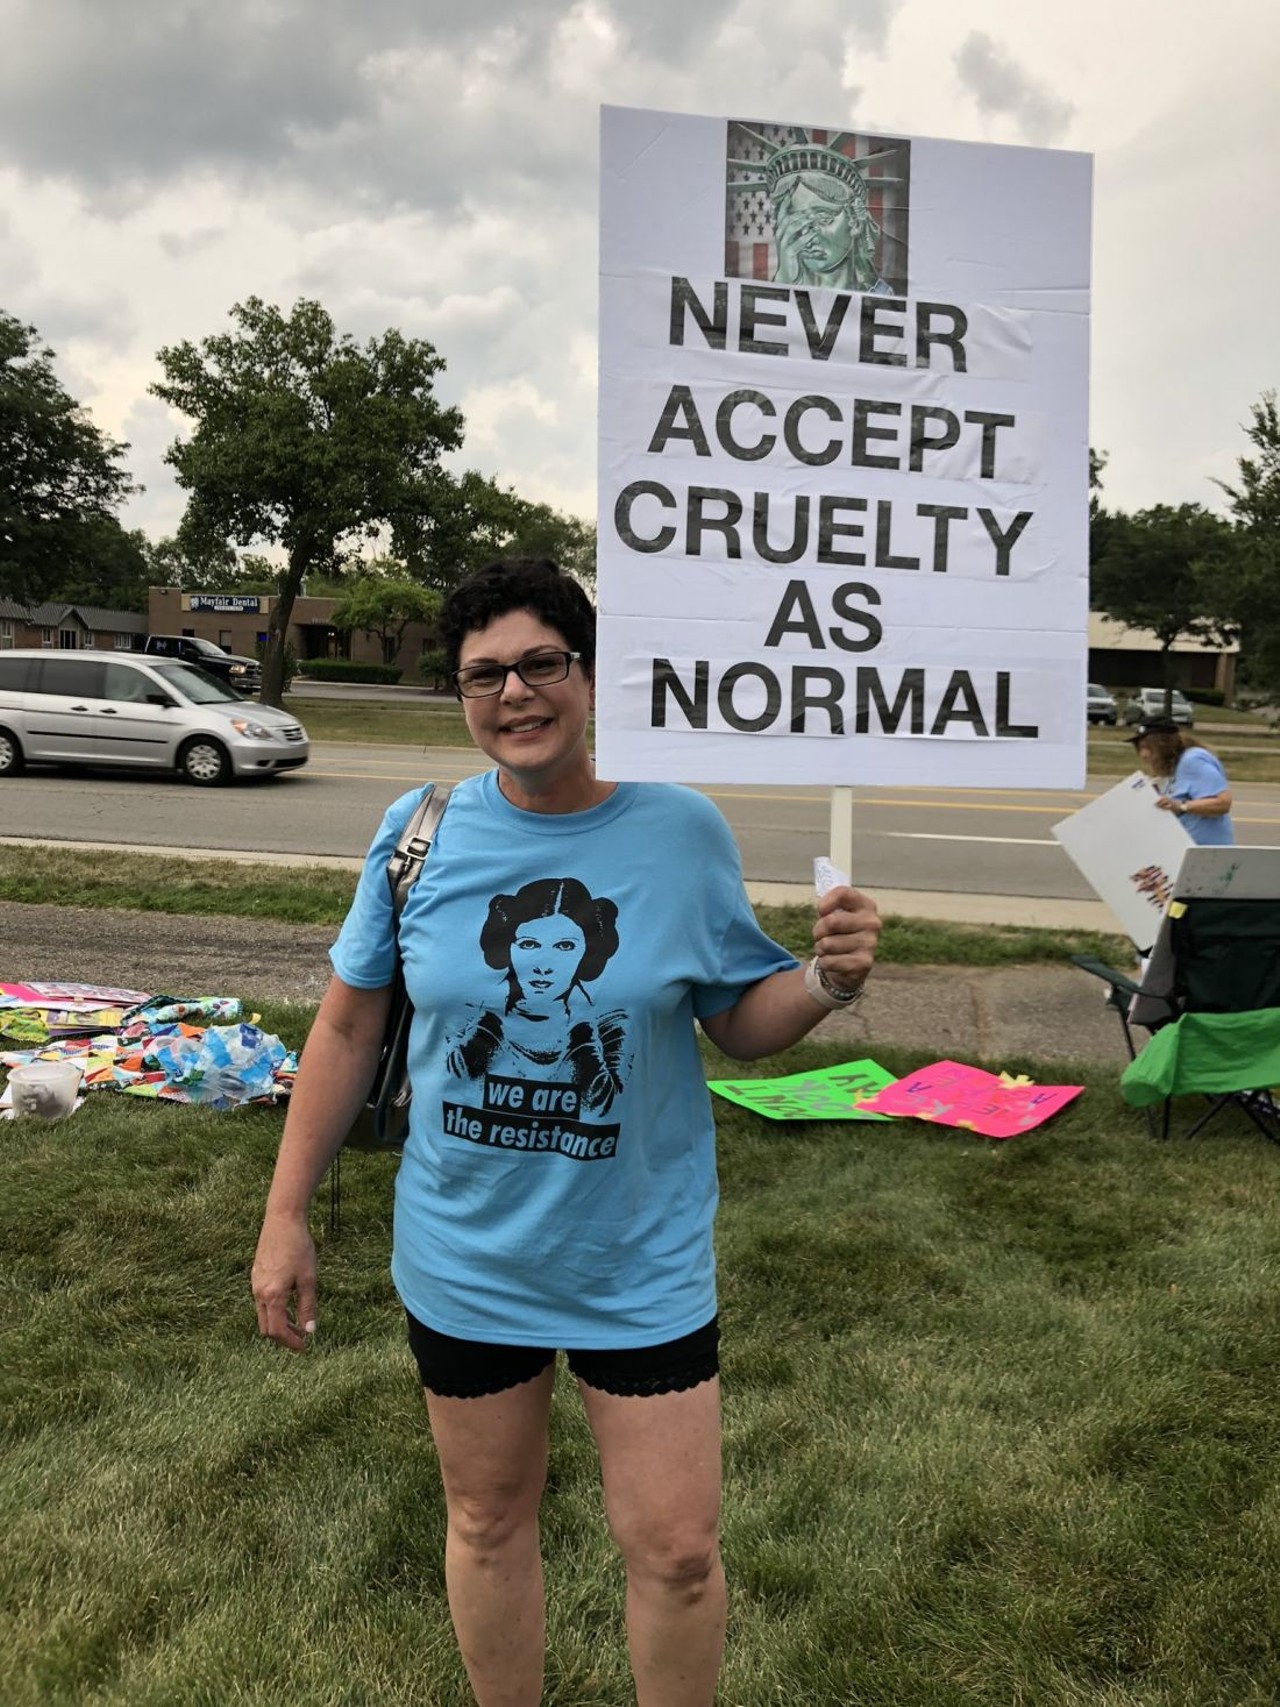 Powerful photos from the Close the Camps rally at the Holocaust Memorial Center in Farmington Hills